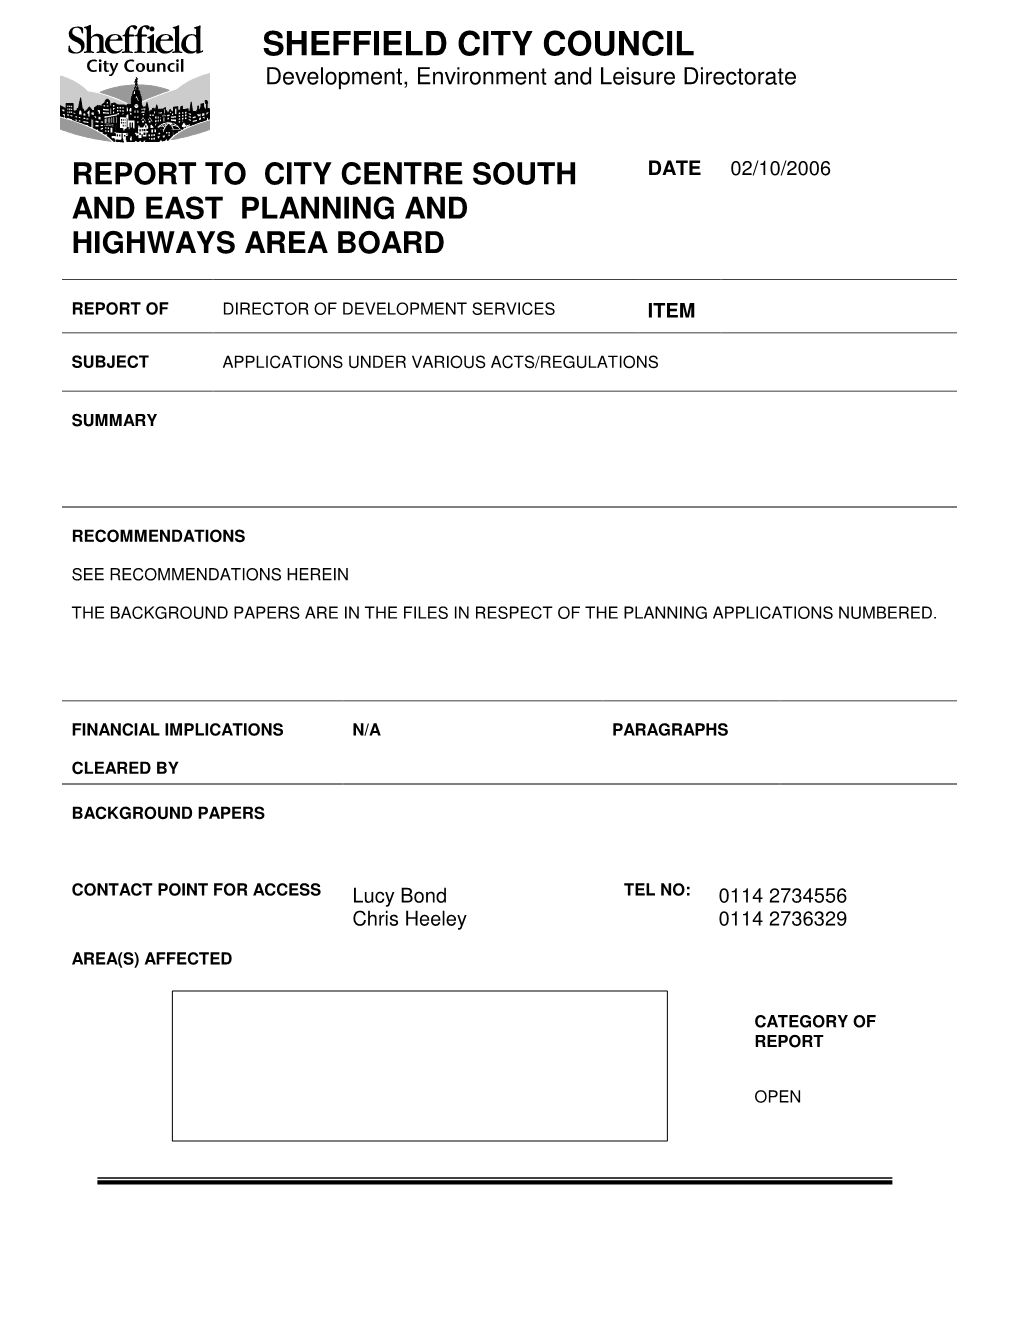 Report to City Centre South and East Planning and Highways Area Board